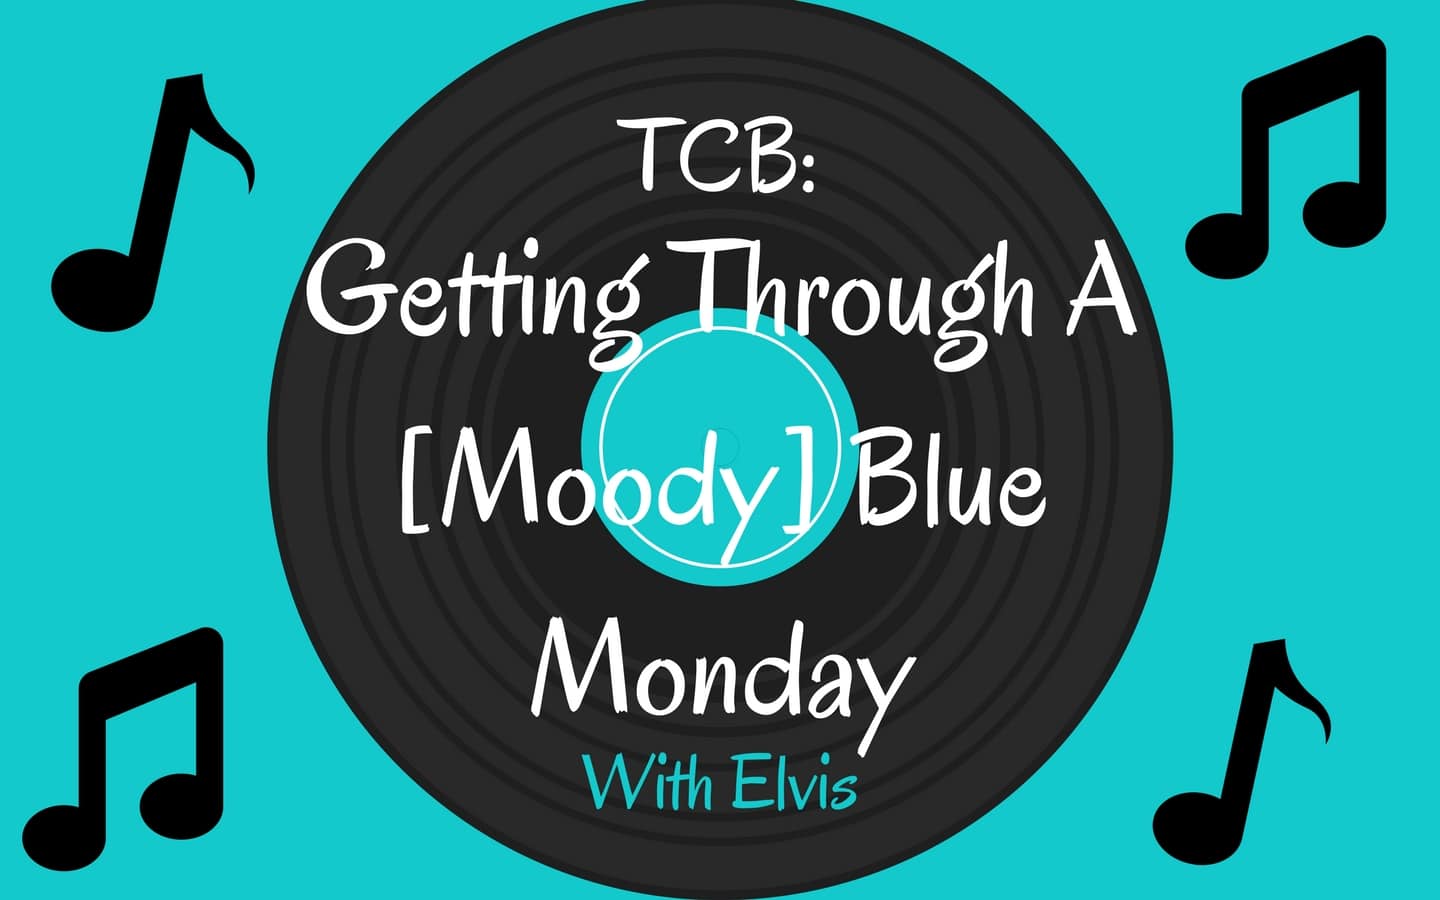 Getting Through A[Moody] Blue Monday